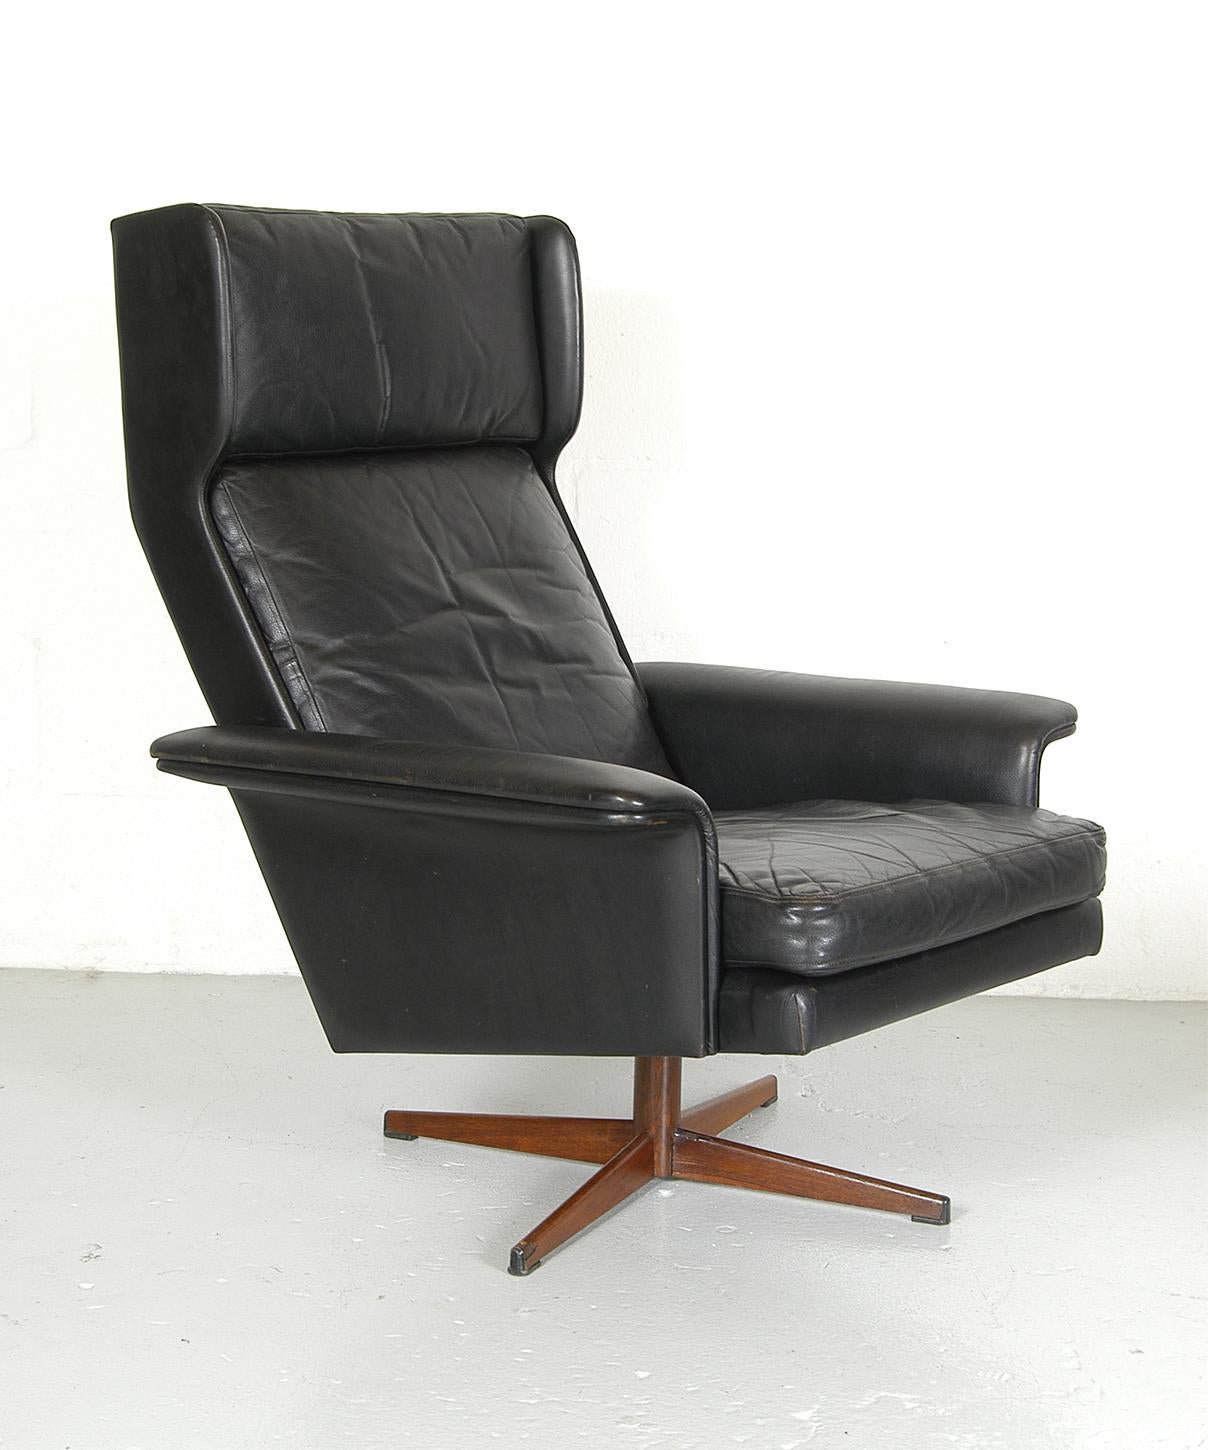 Pair Midcentury Danish Leather Lounge Chairs by Komfort designed HW Klein 1960s In Good Condition In Sherborne, Dorset